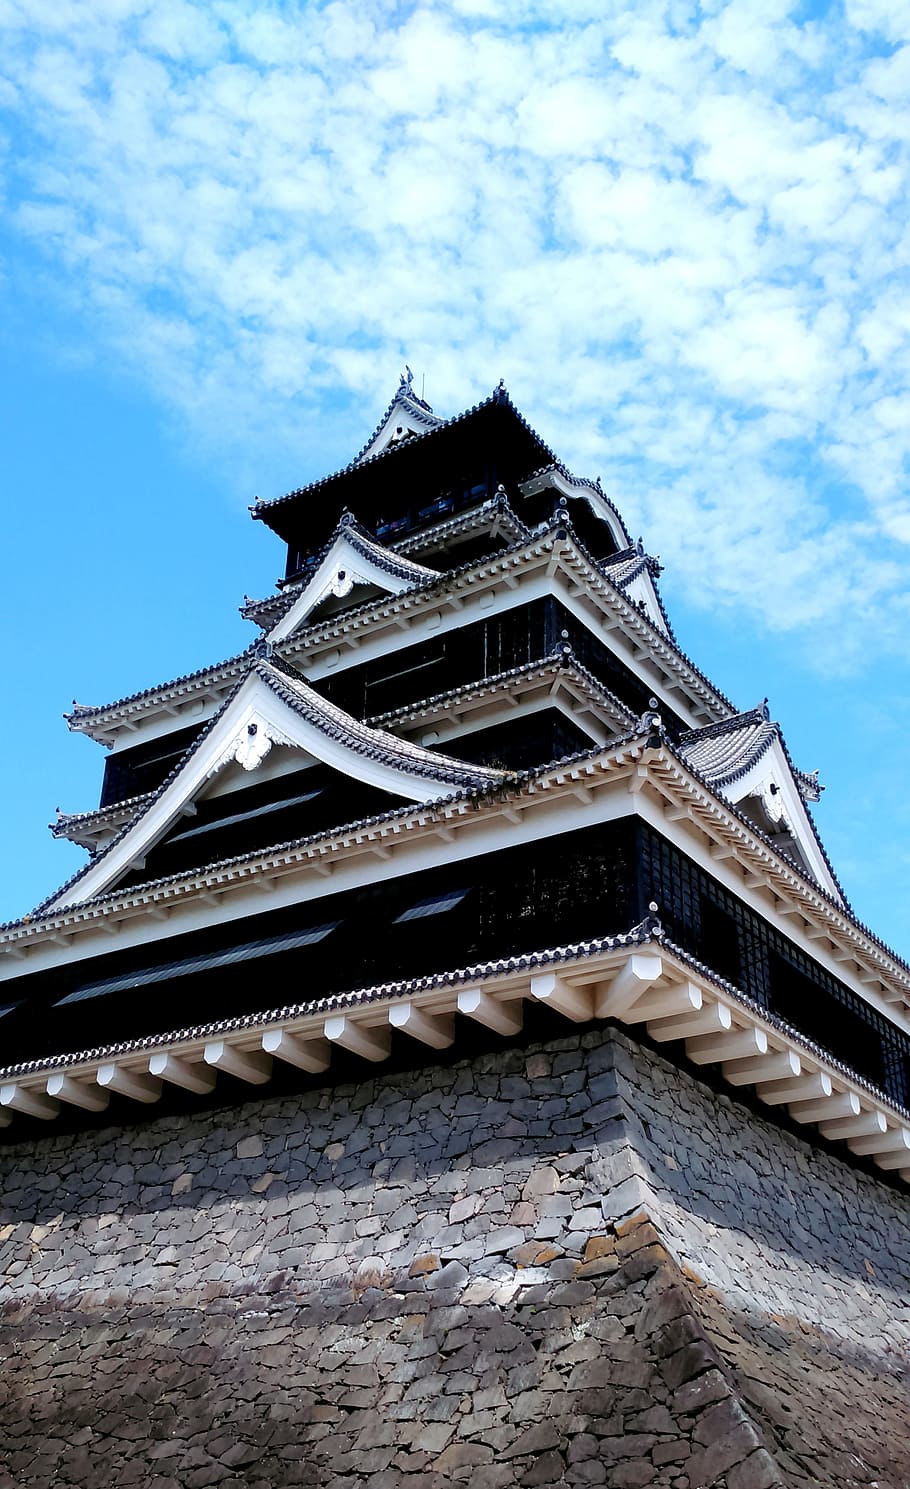 white, black, pagoda temple, too kill house, kyushu, japan, landscape, construction, built structure, architecture